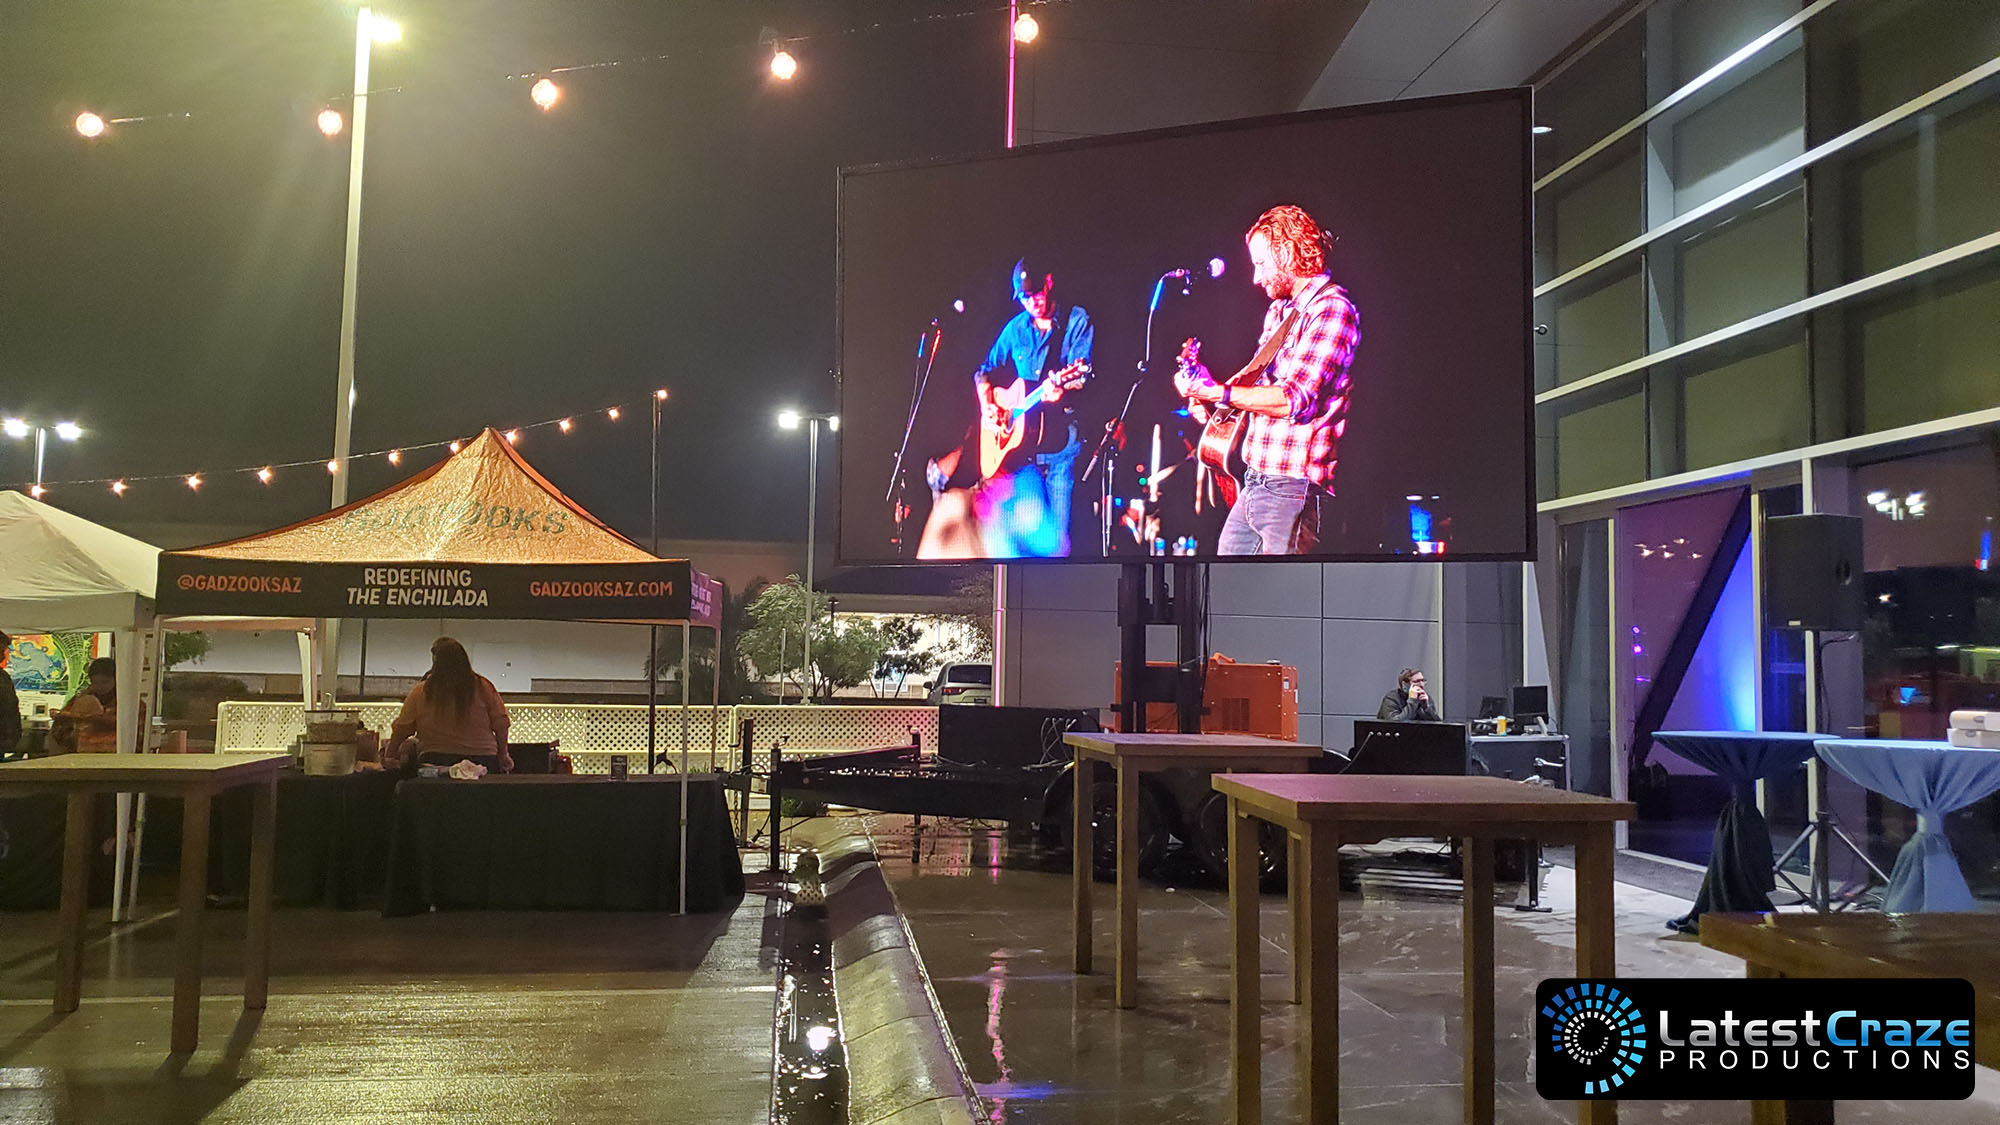 mobile led video wall on trailer outdoor fundraising event Latest Craze Productions